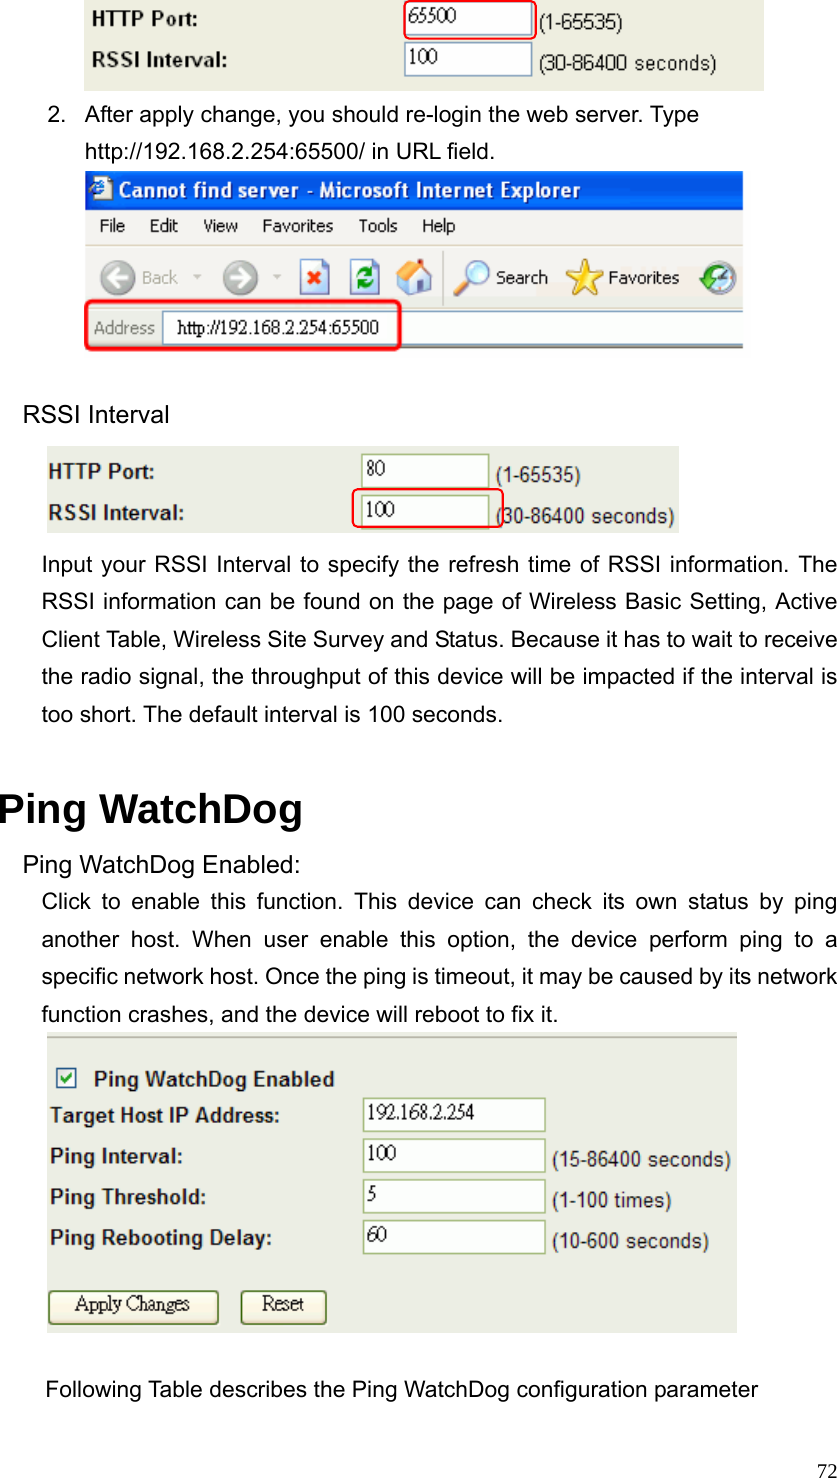  72        2.  After apply change, you should re-login the web server. Type http://192.168.2.254:65500/ in URL field.      RSSI Interval        Input your RSSI Interval to specify the refresh time of RSSI information. The RSSI information can be found on the page of Wireless Basic Setting, Active Client Table, Wireless Site Survey and Status. Because it has to wait to receive the radio signal, the throughput of this device will be impacted if the interval is too short. The default interval is 100 seconds.  Ping WatchDog Ping WatchDog Enabled: Click to enable this function. This device can check its own status by ping another host. When user enable this option, the device perform ping to a specific network host. Once the ping is timeout, it may be caused by its network function crashes, and the device will reboot to fix it.   Following Table describes the Ping WatchDog configuration parameter 